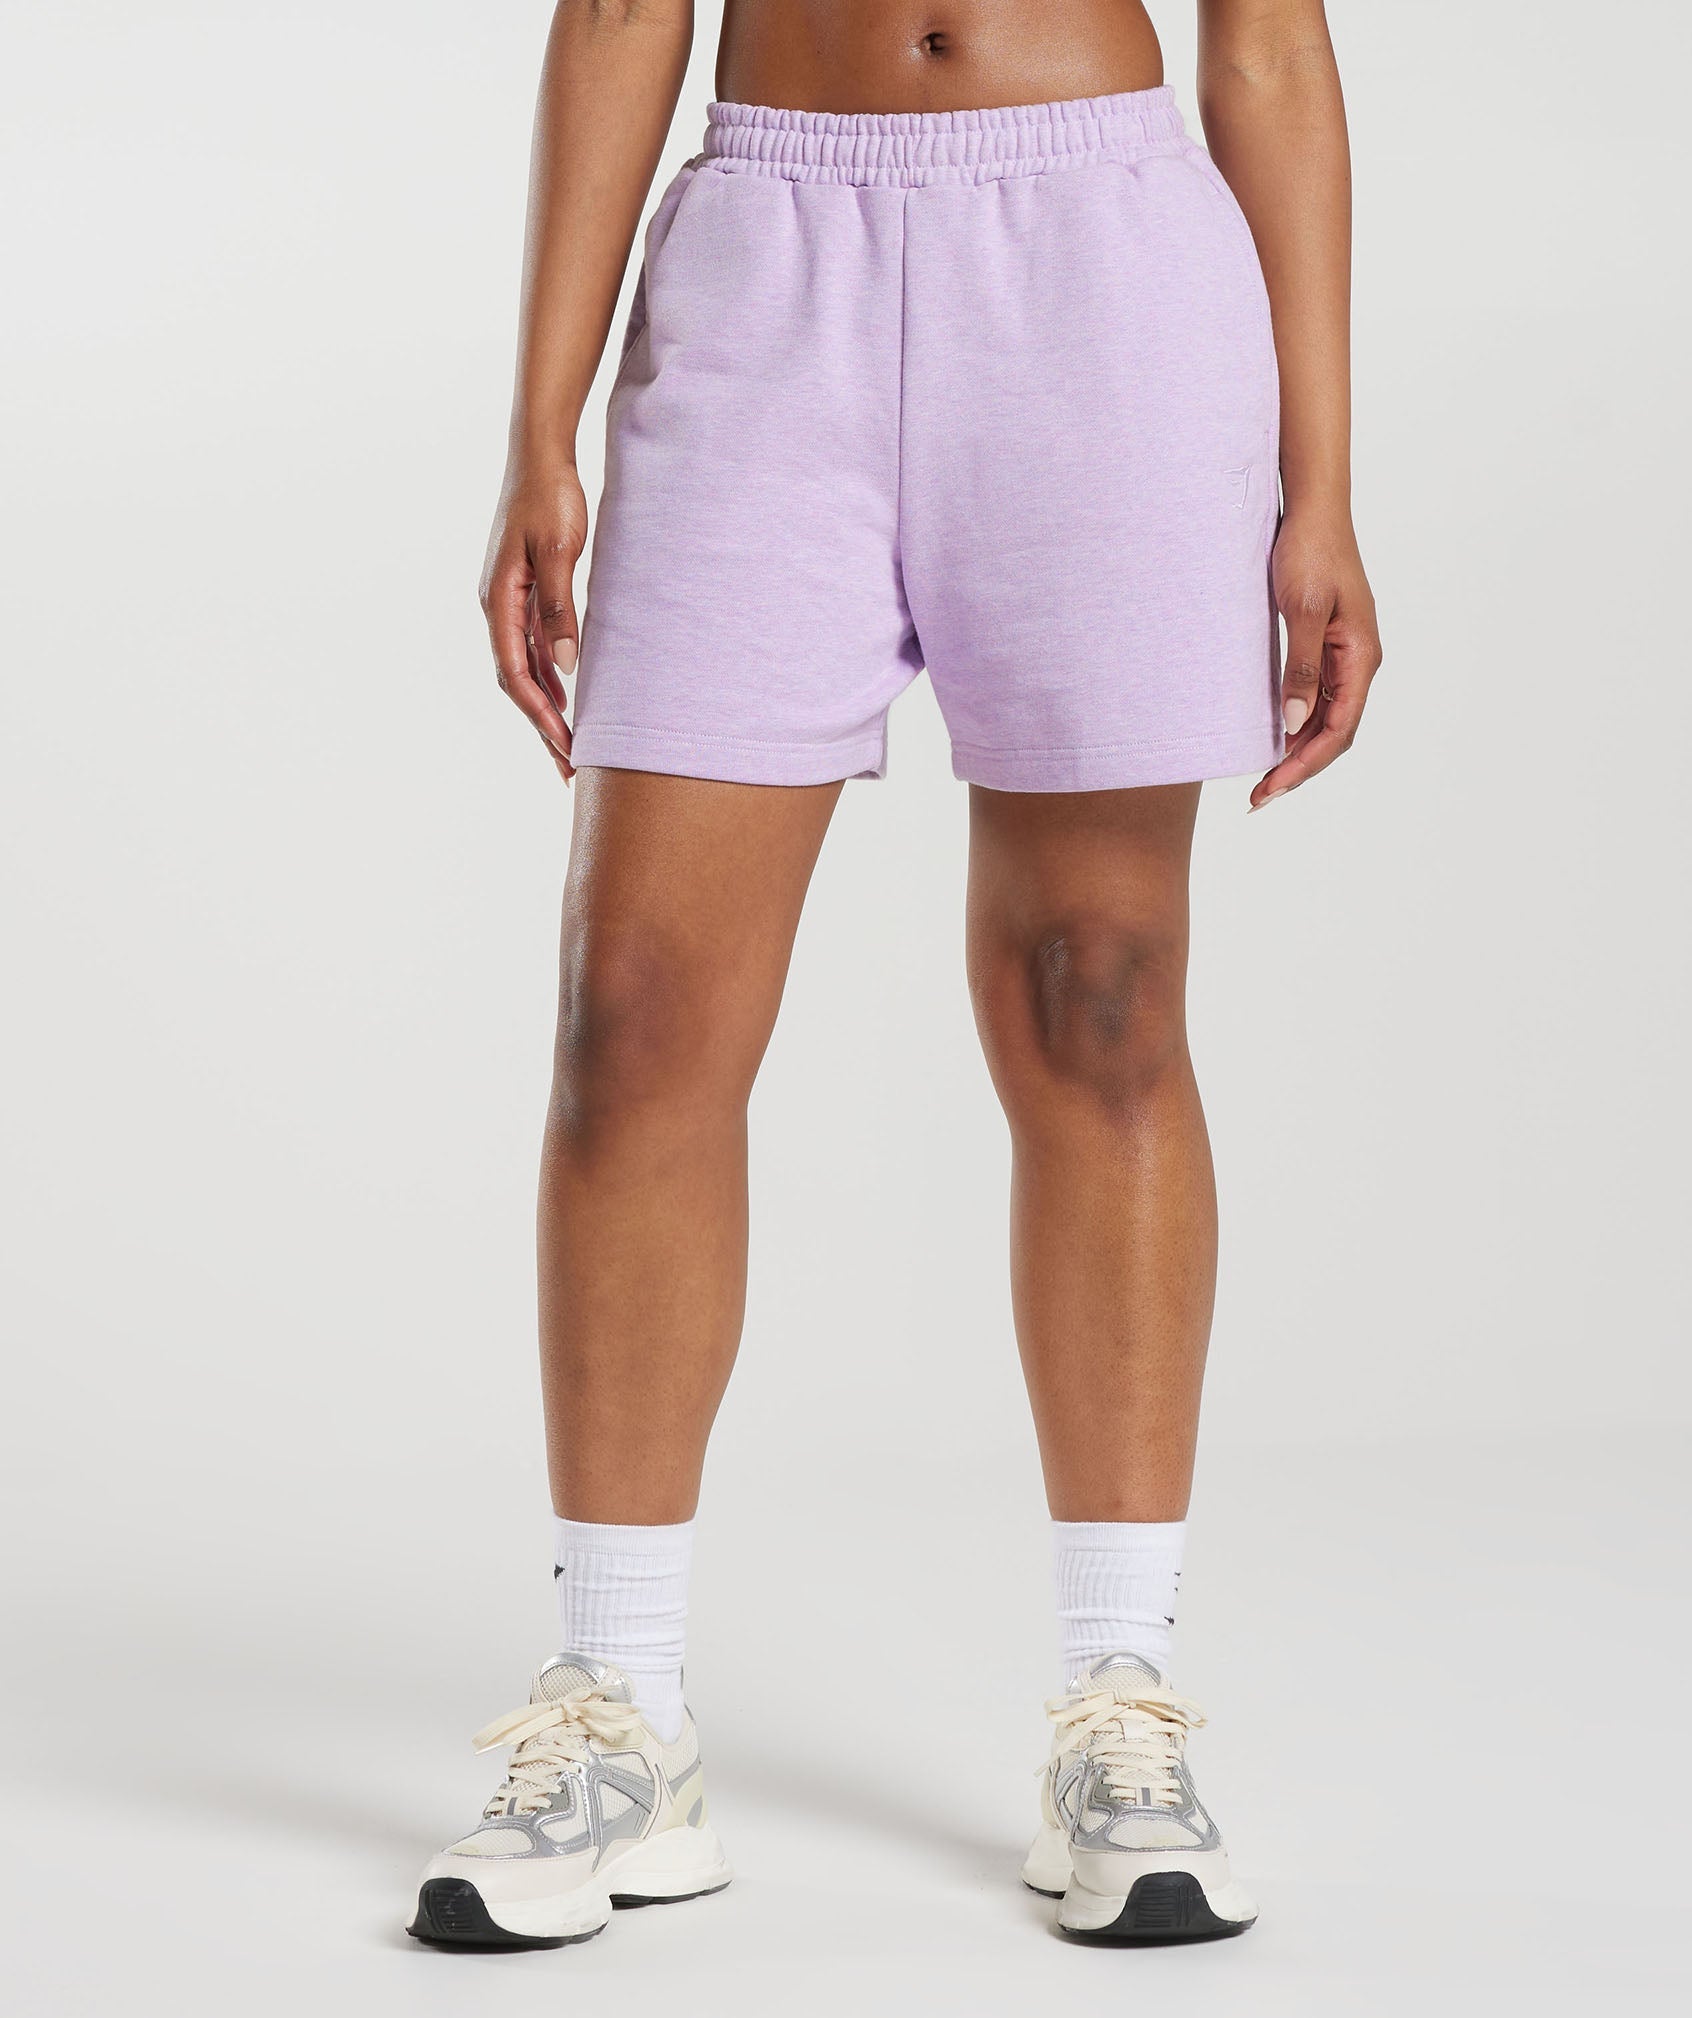 Rest Day Sweats Shorts in Aura Lilac Marl - view 1